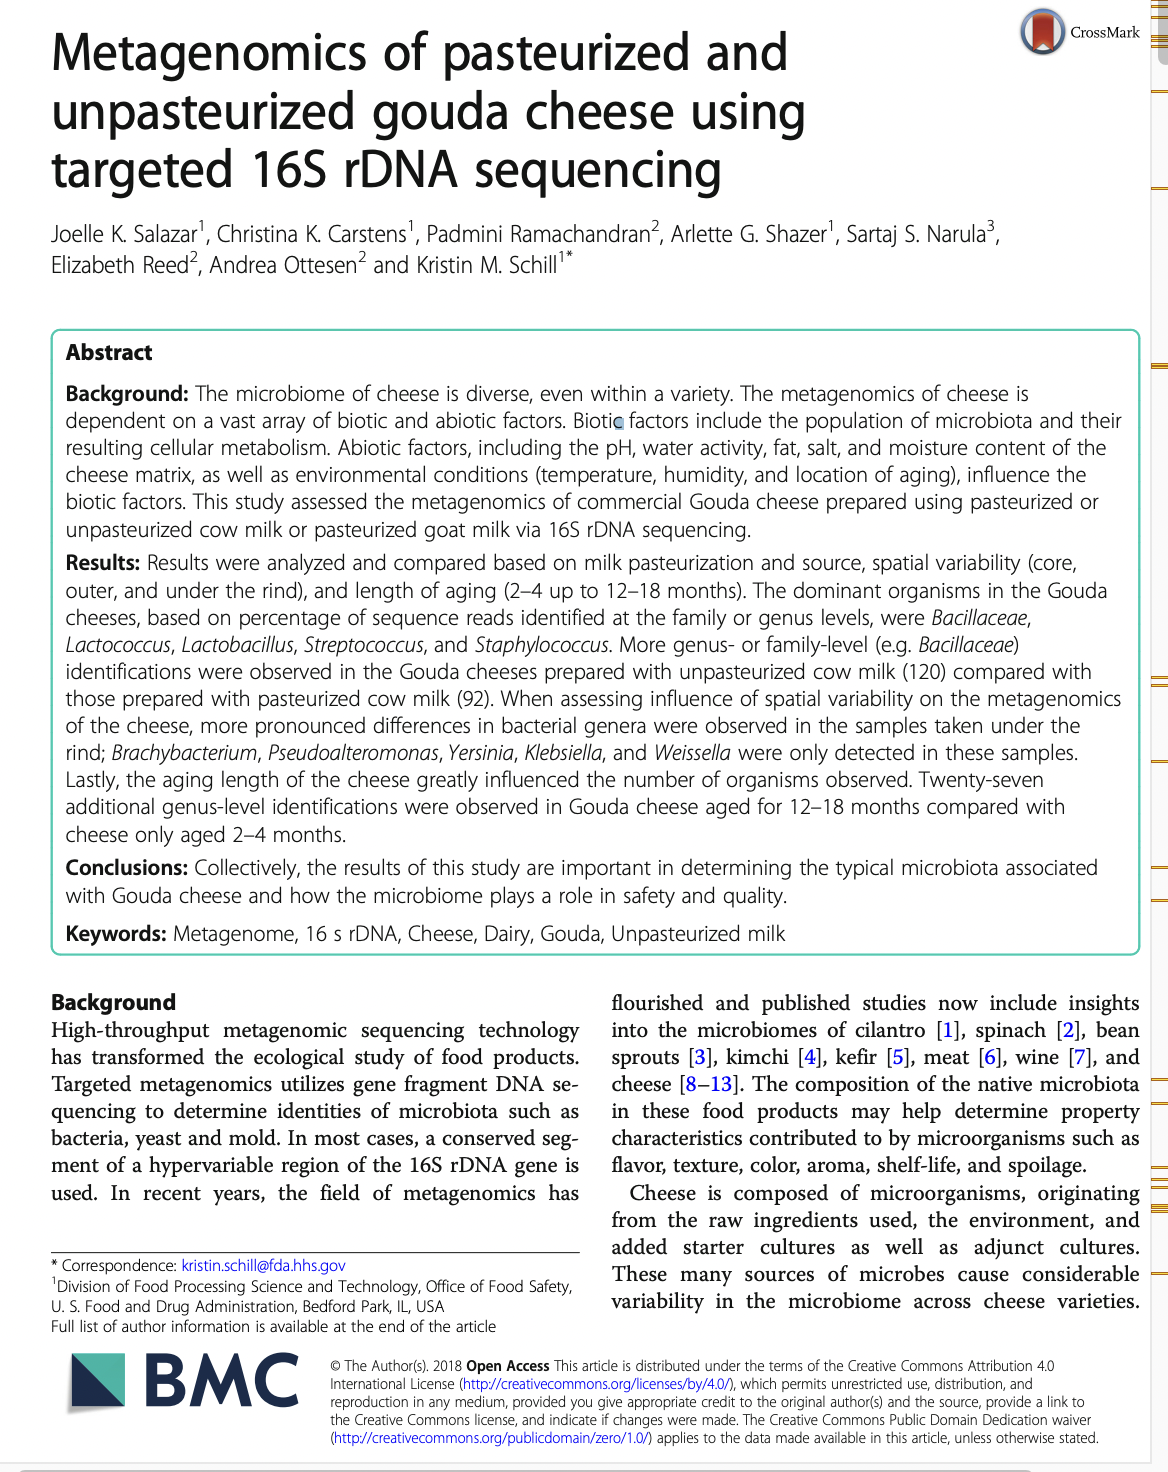 Metagenomics of pasteurized and
unpasteurized
gouda cheese using
targeted 16S rDNA sequencing
Joelle K. Salazar¹, Christina K. Carstens¹, Padmini Ramachandran², Arlette G. Shazer¹, Sartaj S. Narula³,
Elizabeth Reed², Andrea Ottesen² and Kristin M. Schill¹*
Abstract
Background: The microbiome of cheese is diverse, even within a variety. The metagenomics of cheese is
dependent on a vast array of biotic and abiotic factors. Biotic factors include the population of microbiota and their
resulting cellular metabolism. Abiotic factors, including the pH, water activity, fat, salt, and moisture content of the
cheese matrix, as well as environmental conditions (temperature, humidity, and location of aging), influence the
biotic factors. This study assessed the metagenomics of commercial Gouda cheese prepared using pasteurized or
unpasteurized cow milk or pasteurized goat milk via 16S rDNA sequencing.
Results: Results were analyzed and compared based on milk pasteurization and source, spatial variability (core,
outer, and under the rind), and length of aging (2-4 up to 12-18 months). The dominant organisms in the Gouda
cheeses, based on percentage of sequence reads identified at the family or genus levels, were Bacillaceae,
Lactococcus, Lactobacillus, Streptococcus, and Staphylococcus. More genus- or family-level (e.g. Bacillaceae)
identifications were observed in the Gouda cheeses prepared with unpasteurized cow milk (120) compared with
those prepared with pasteurized cow milk (92). When assessing influence of spatial variability on the metagenomics
of the cheese, more pronounced differences in bacterial genera were observed in the samples taken under the
rind; Brachybacterium, Pseudoalteromonas, Yersinia, Klebsiella, and Weissella were only detected in these samples.
Lastly, the aging length of the cheese greatly influenced the number of organisms observed. Twenty-seven
additional genus-level identifications were observed in Gouda cheese aged for 12-18 months compared with
cheese only aged 2-4 months.
Conclusions: Collectively, the results of this study are important in determining the typical microbiota associated
with Gouda cheese and how the microbiome plays a role in safety and quality.
Keywords: Metagenome, 16 s rDNA, Cheese, Dairy, Gouda, Unpasteurized milk
Background
High-throughput metagenomic sequencing technology
has transformed the ecological study of food products.
Targeted metagenomics utilizes gene fragment DNA se-
quencing to determine identities of microbiota such as
bacteria, yeast and mold. In most cases, a conserved seg-
ment of a hypervariable region of the 16S rDNA gene is
used. In recent years, the field of metagenomics has
* Correspondence: kristin.schill@fda.hhs.gov
Division of Processing ence and Technology,
U.S. Food and Drug Administration, Bedford Park, IL, USA
Full list of author information is available at the end of the article
BMC
CrossMark
of
Safety,
flourished and published studies now include insights
into the microbiomes of cilantro [1], spinach [2], bean
sprouts [3], kimchi [4], kefir [5], meat [6], wine [7], and
cheese [8-13]. The composition of the native microbiota
in these food products may help determine property
characteristics contributed to by microorganisms such as
flavor, texture, color, aroma, shelf-life, and spoilage.
Cheese is composed of microorganisms, originating
from the raw ingredients used, the environment, and
added starter cultures as well as adjunct cultures.
These many sources of microbes cause considerable
variability in the microbiome across cheese varieties.
Ⓒ The Author(s). 2018 Open Access This article is distributed under the terms of the Creative Commons Attribution 4.0
International License (http://creativecommons.org/licenses/by/4.0/), which permits unrestricted use, distribution, and
reproduction in any medium, provided you give appropriate credit to the original author(s) and the source, provide a link to
the Creative Commons license, and indicate if changes were made. The Creative Commons Public Domain Dedication waiver
(http://creativecommons.org/publicdomain/zero/1.0/) applies to the data made available in this article, unless otherwise stated.